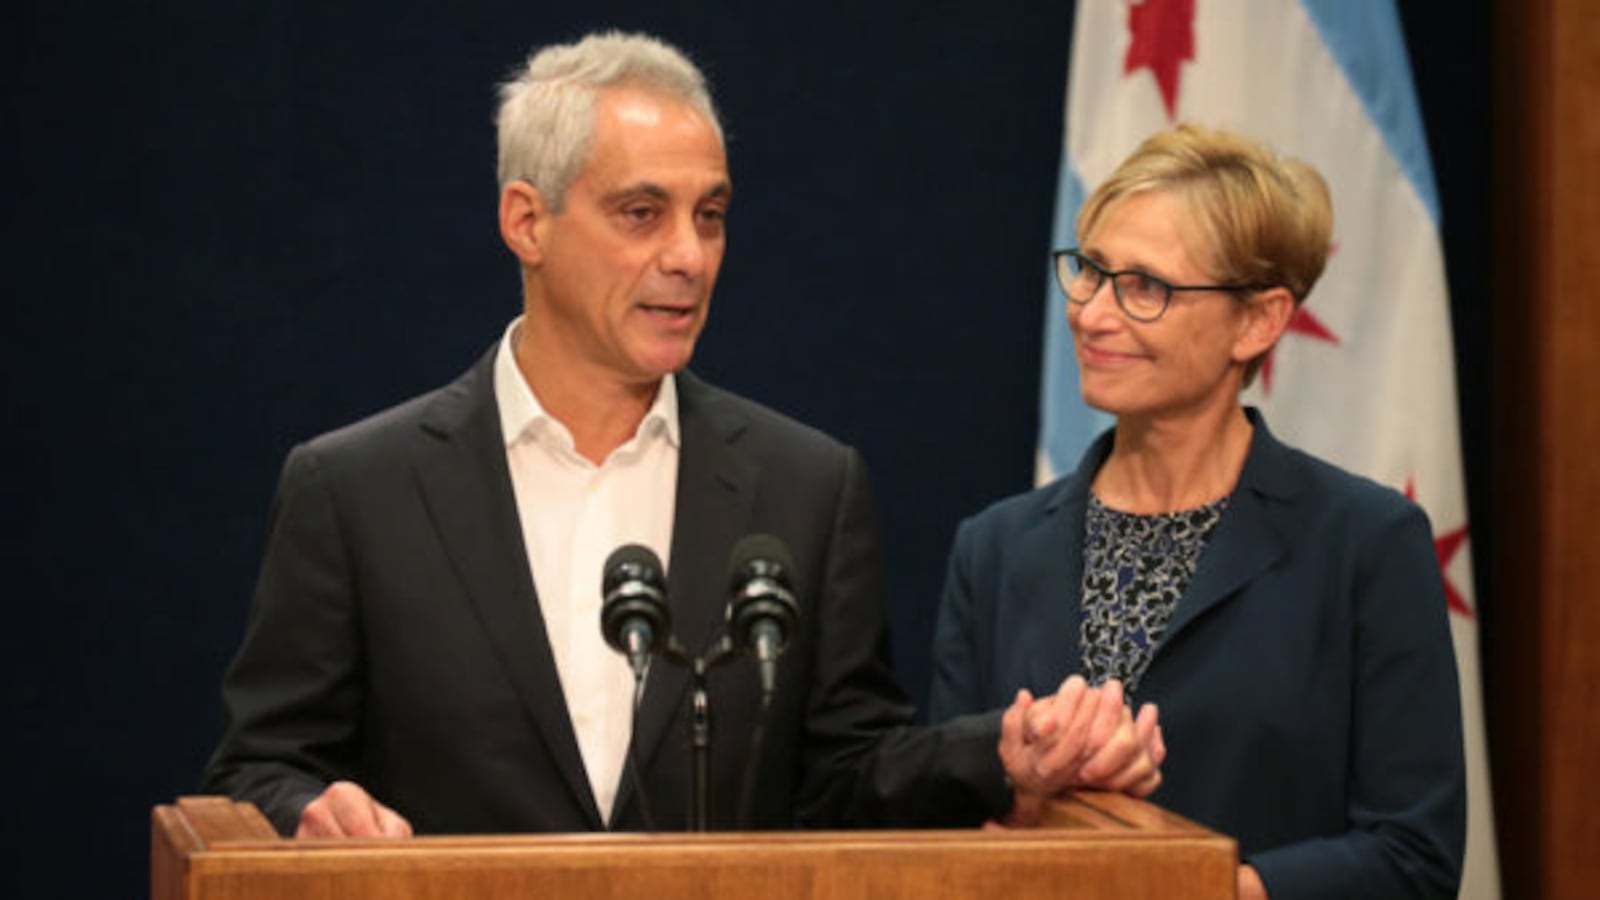 With wife Amy Rule by his side, Chicago Mayor Rahm Emanuel announces Tuesday, Sept. 4, 2018 he will not seek a third term in office at a press conference on the 5th floor at City Hall in Chicago.